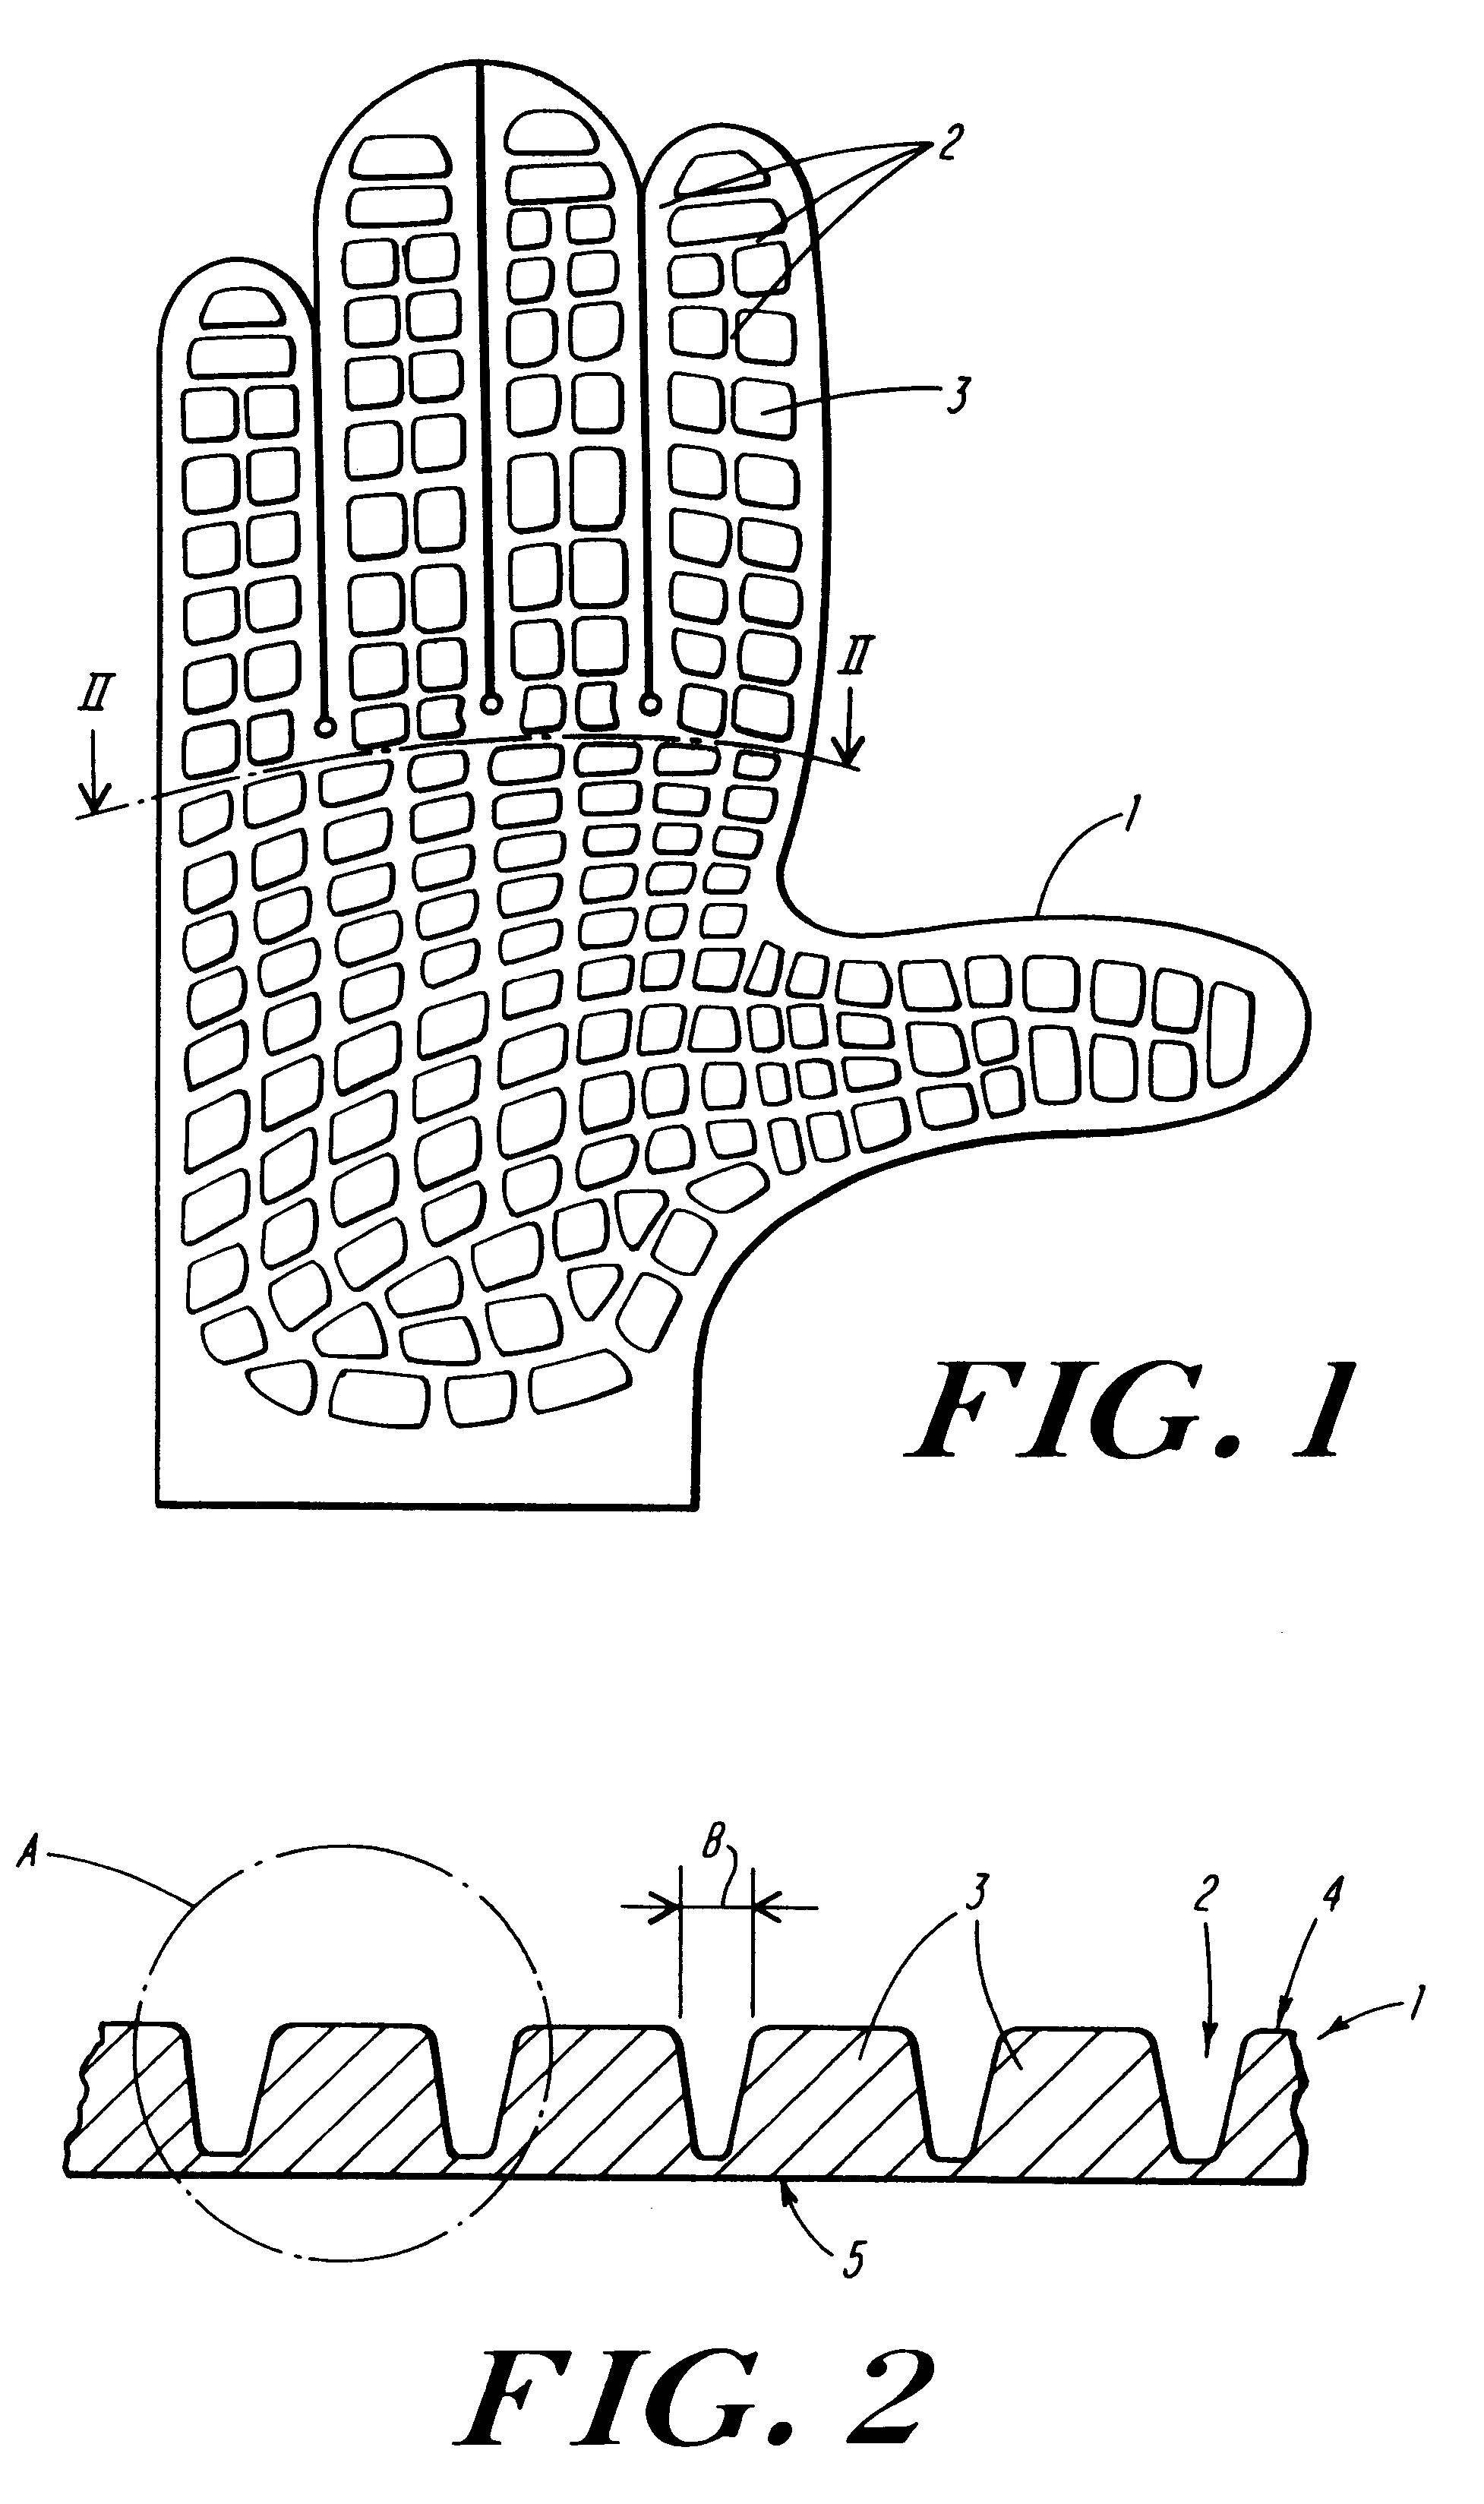 Device for the protection of objects or body parts against vibrations, in particular a vibration-damping glove or antivibration glove